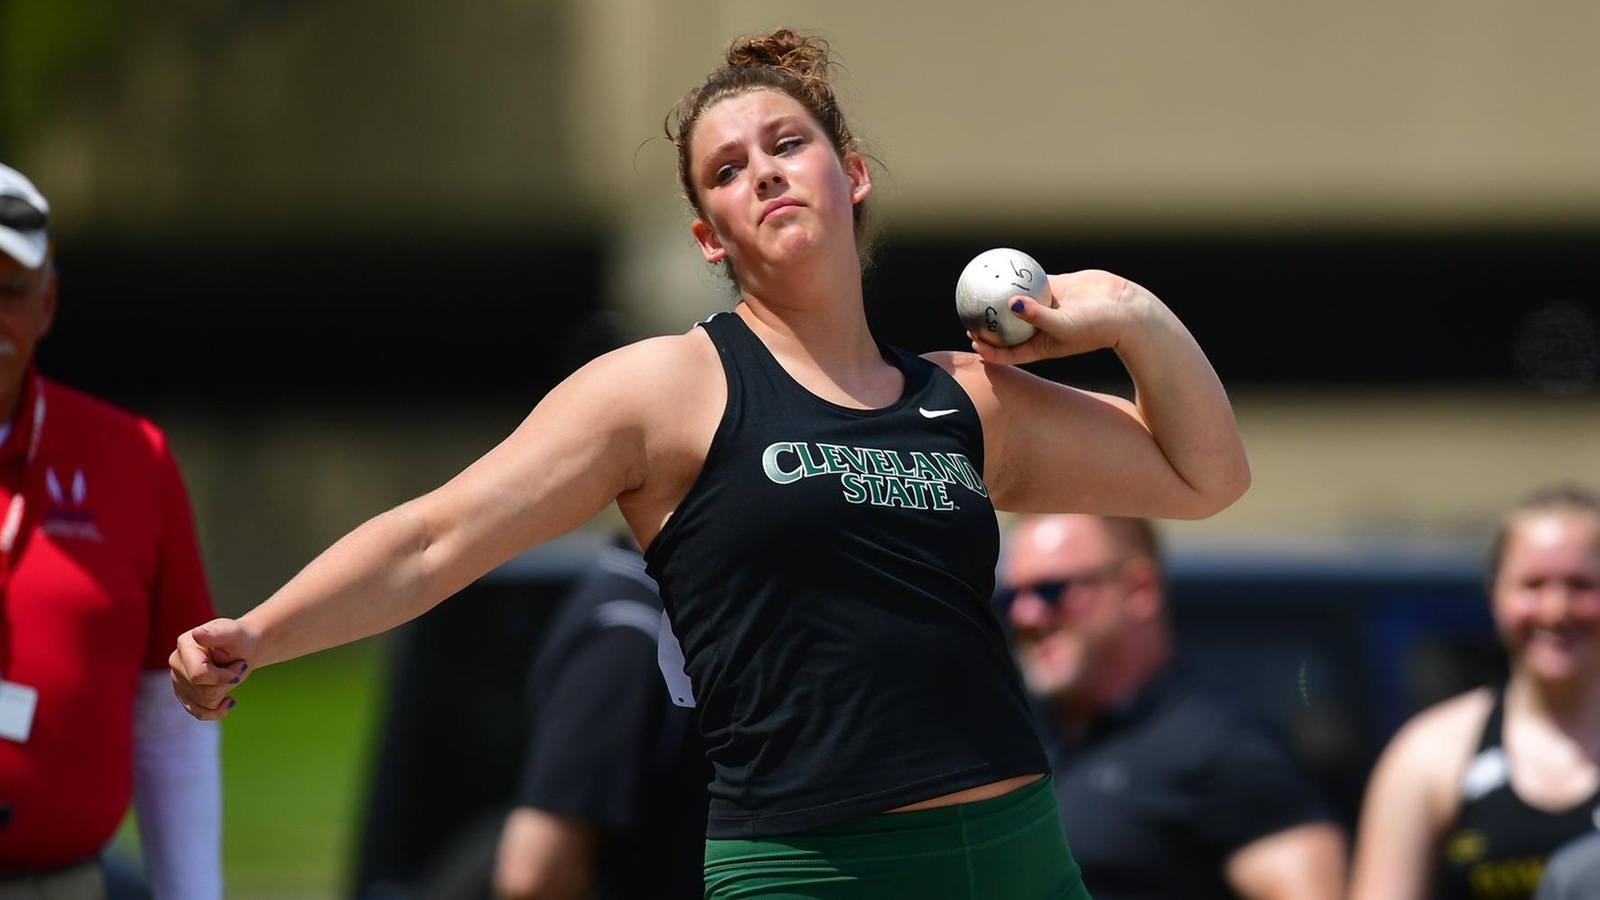 Cleveland State Track &amp; Field Has Strong Second Day At #HLTF Outdoor Championships